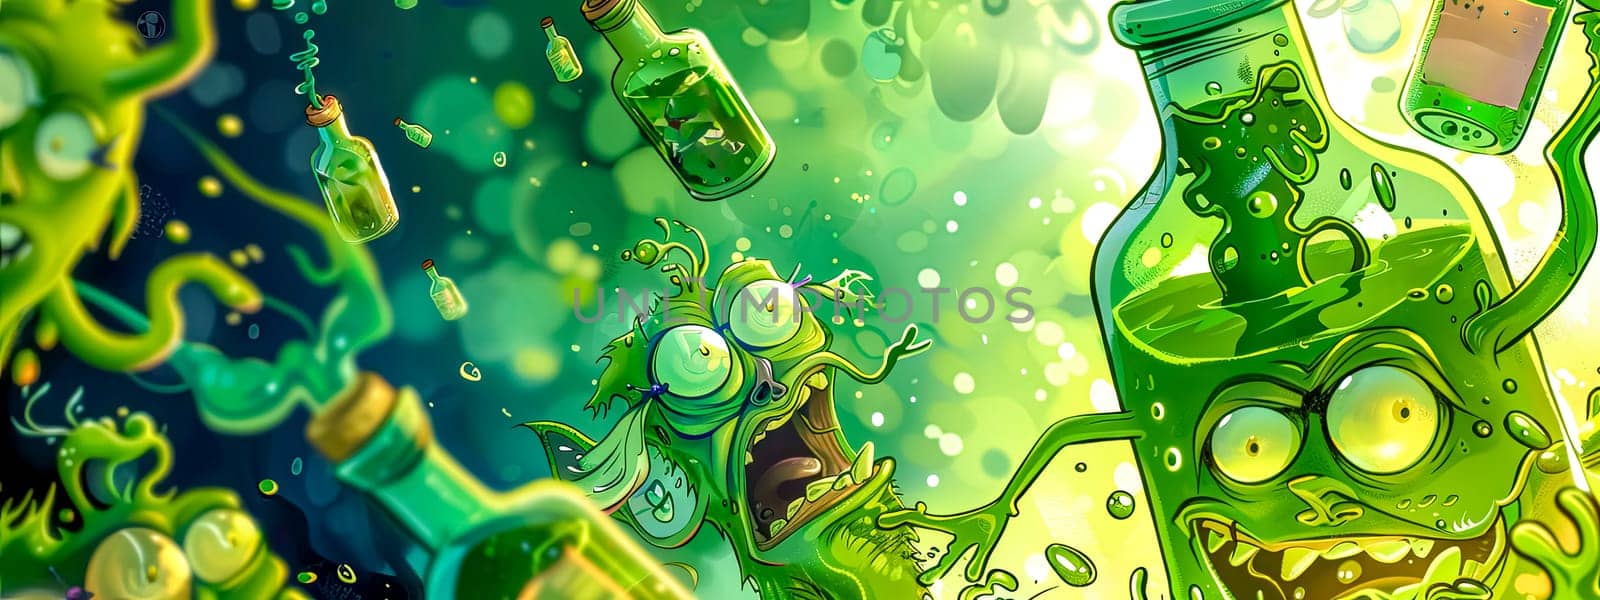 Vibrant illustration of quirky cartoon monsters engaging in a playful science experiment with bubbling potions